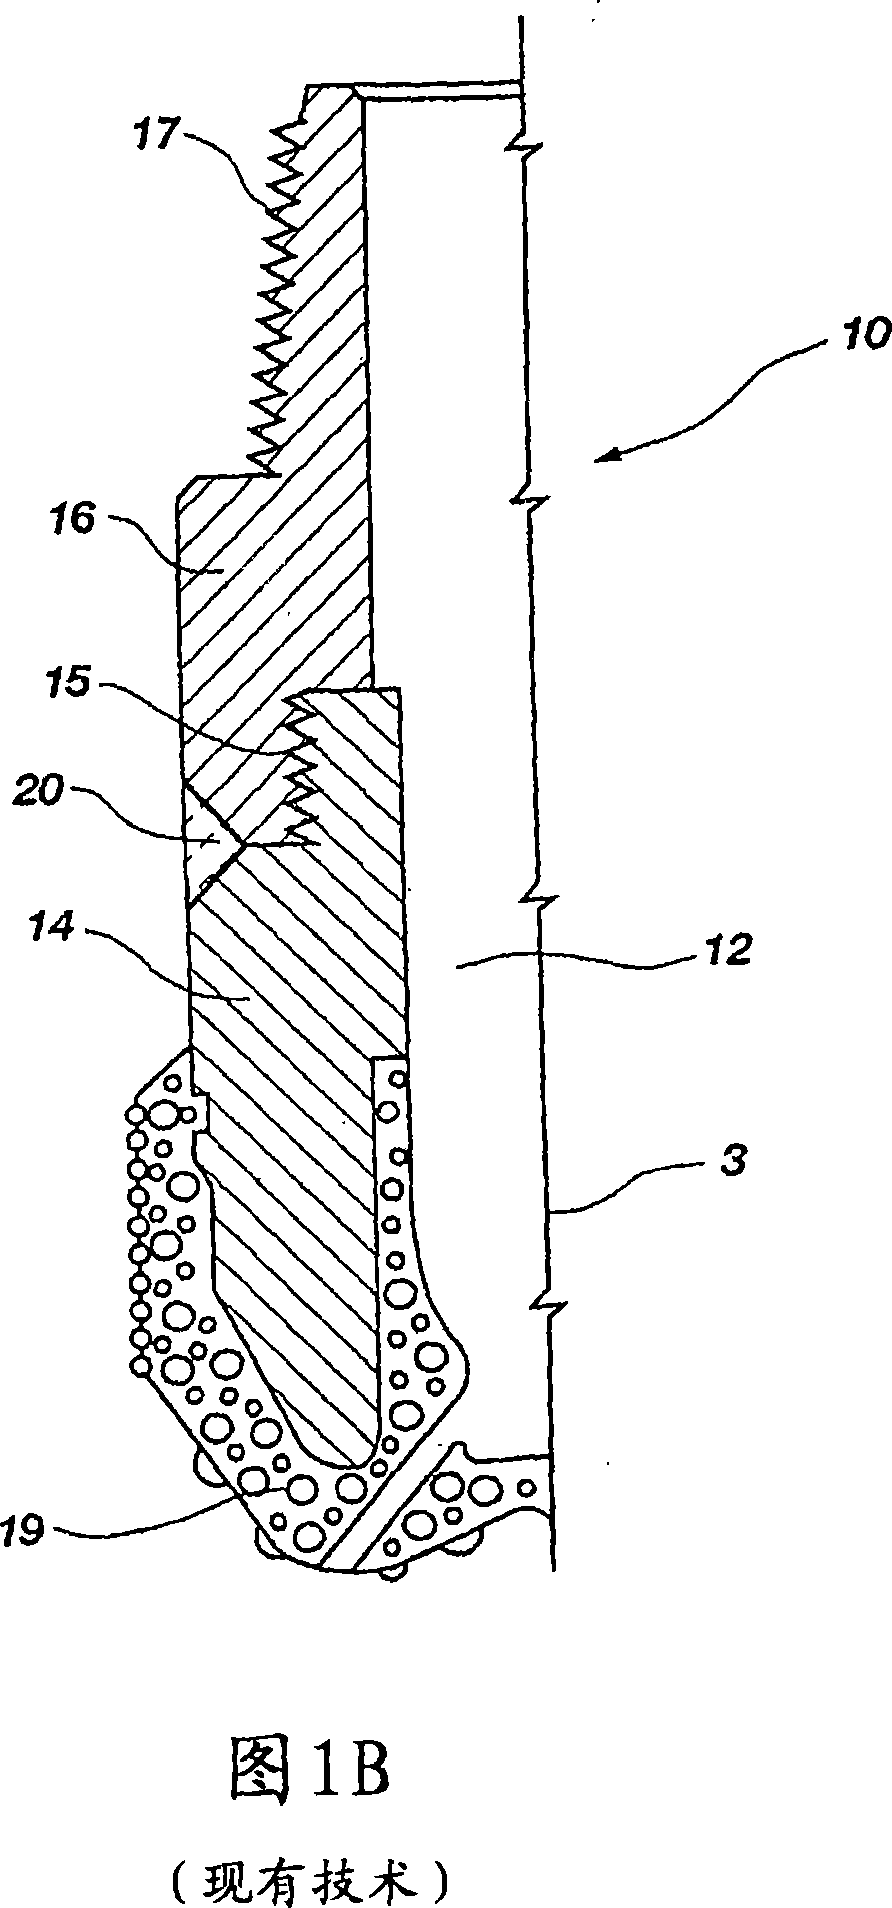 Rotary drill bit shank, rotary drill bits so equipped, and methods of manufacture